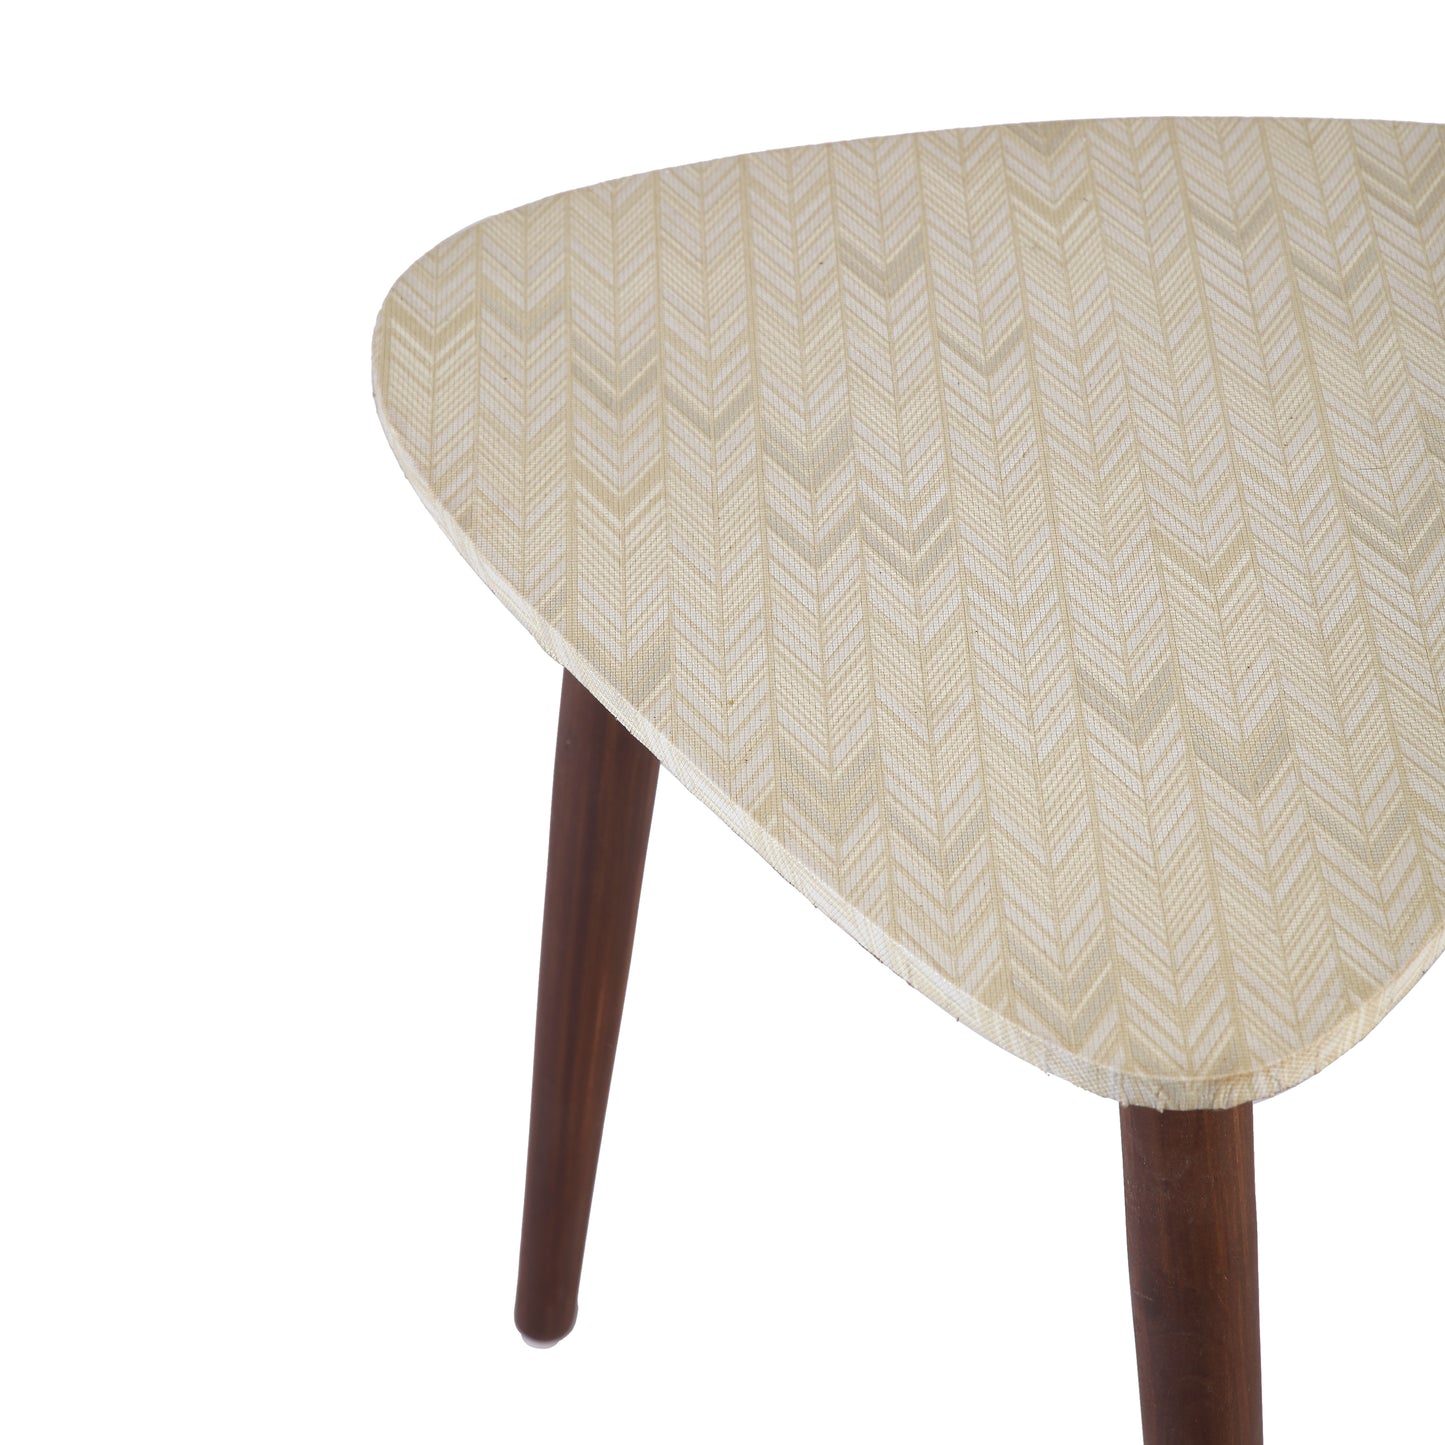 A Tiny Mistake Golden Herringbone Pattern Trinity Side Table, End Table (1 Piece)